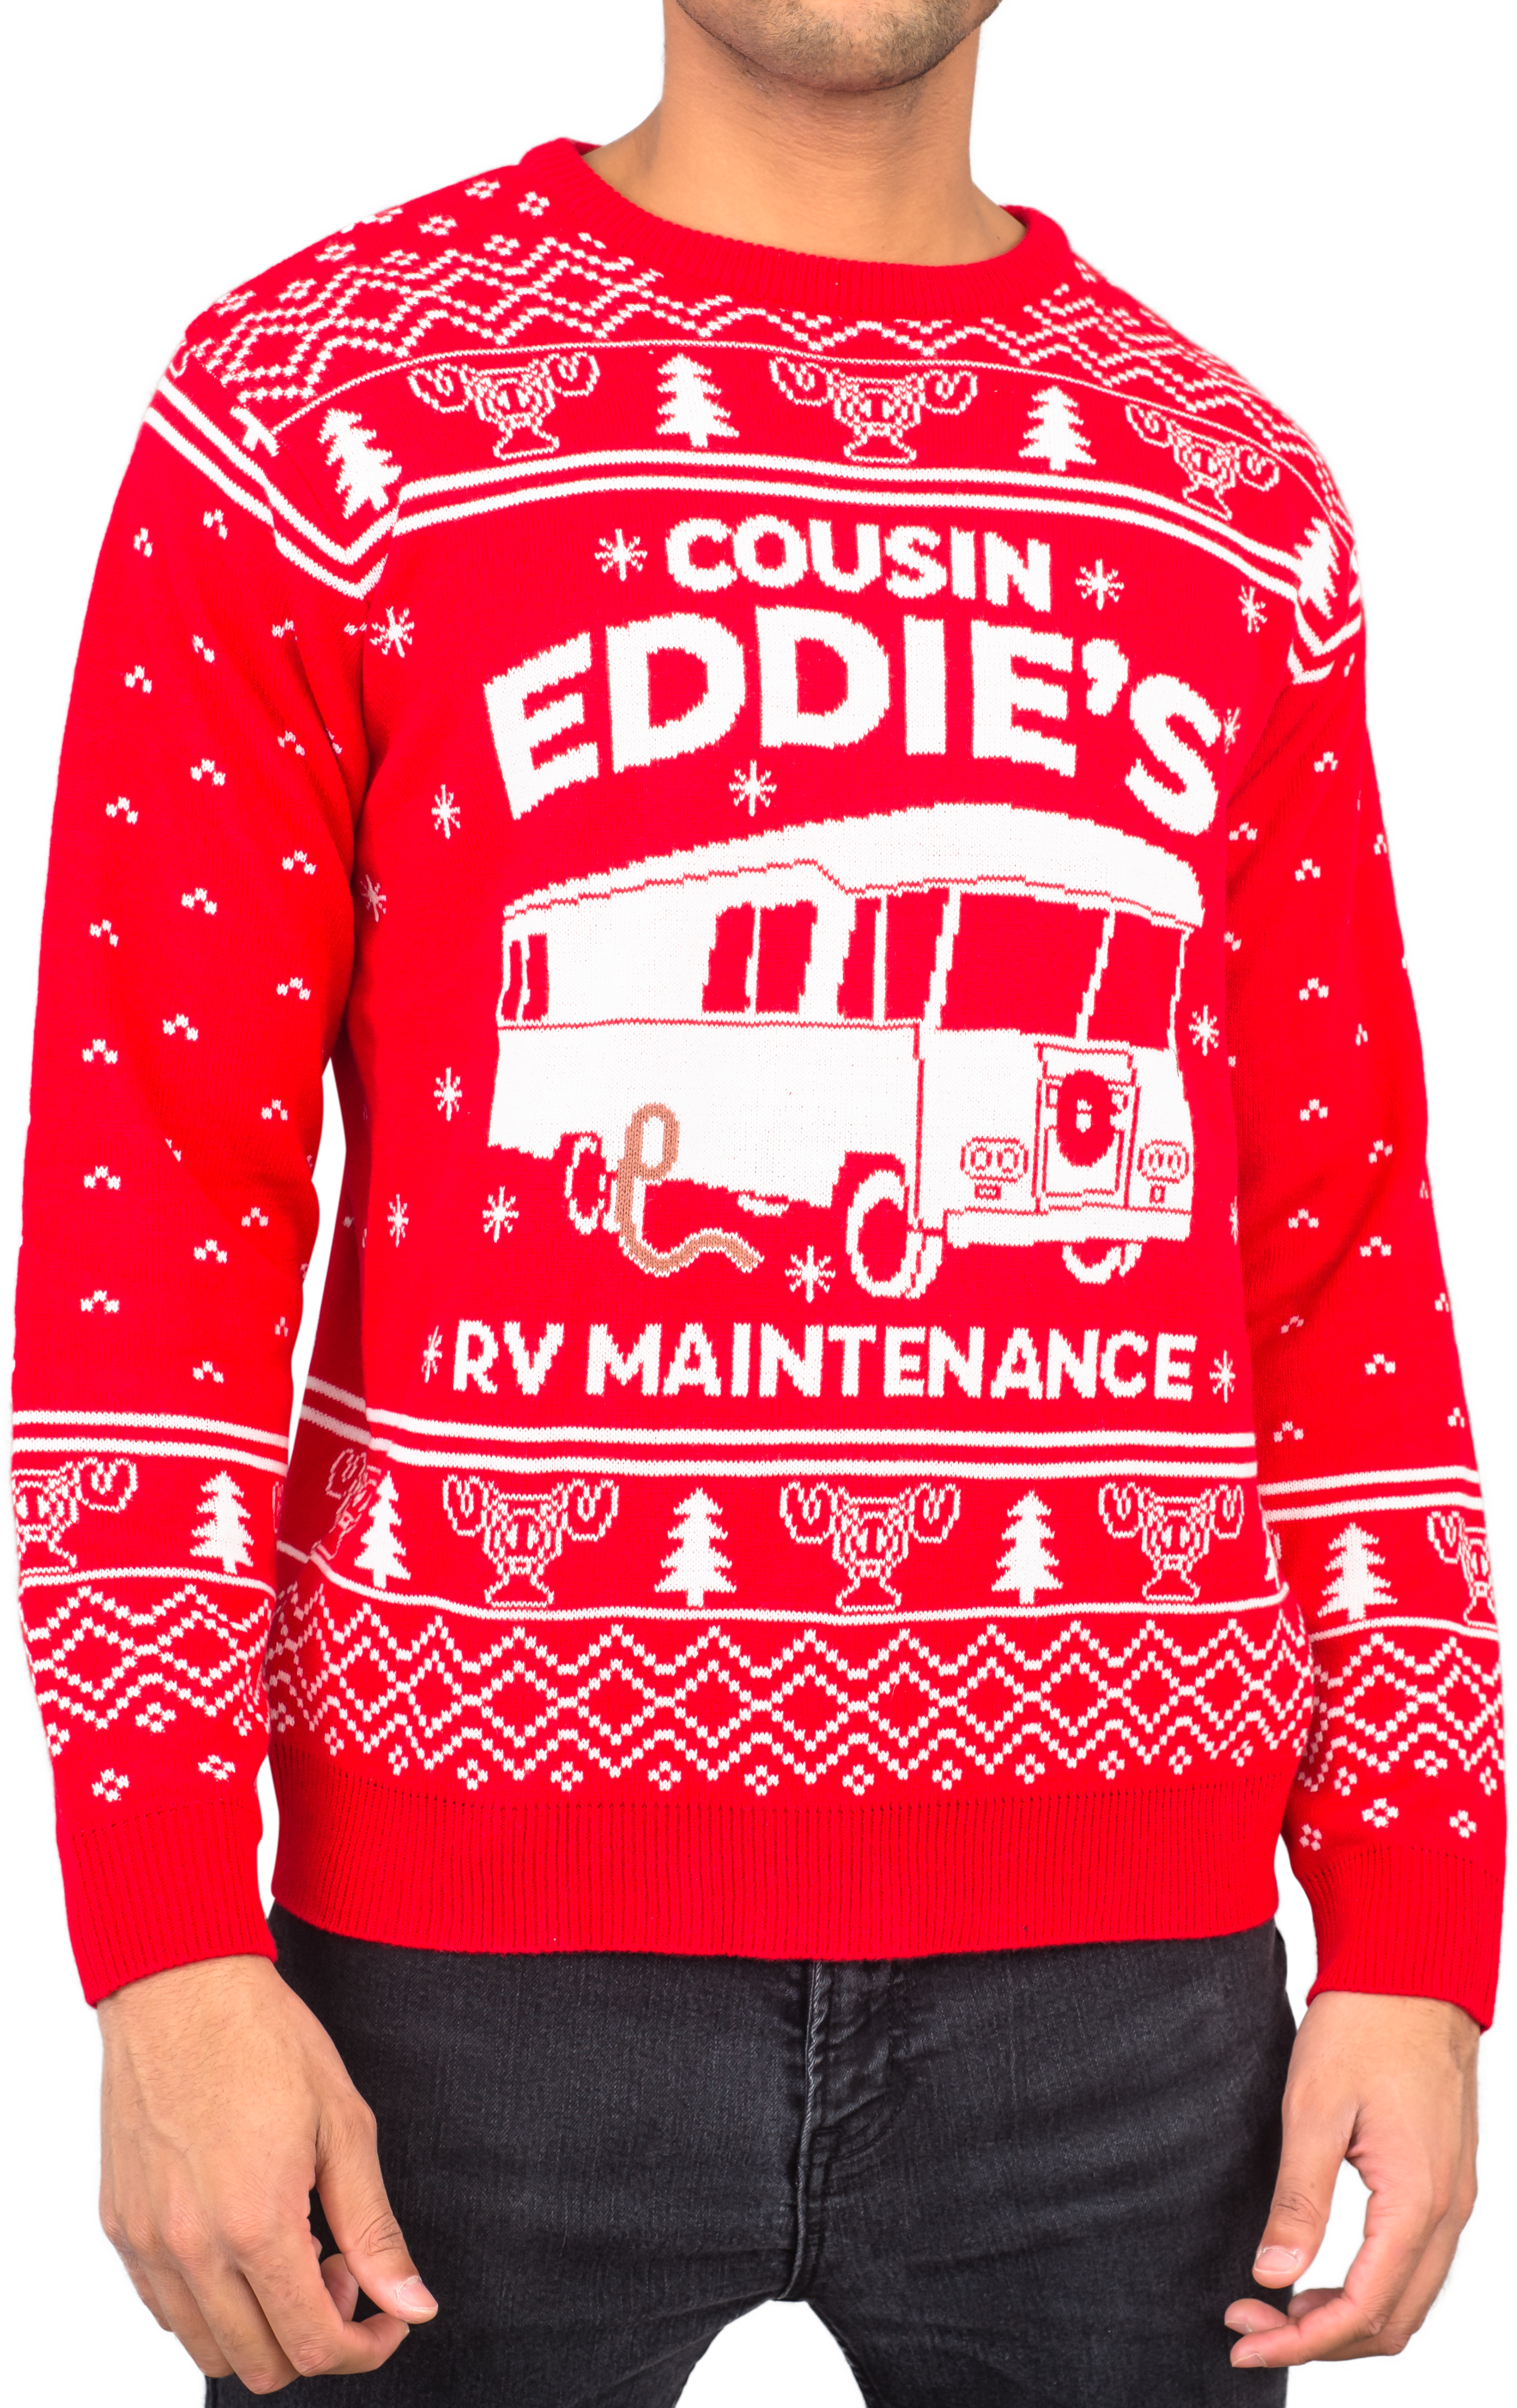 Men's National Lampoon Christmas Vacation Red Eddies Ugly Christmas Sweater